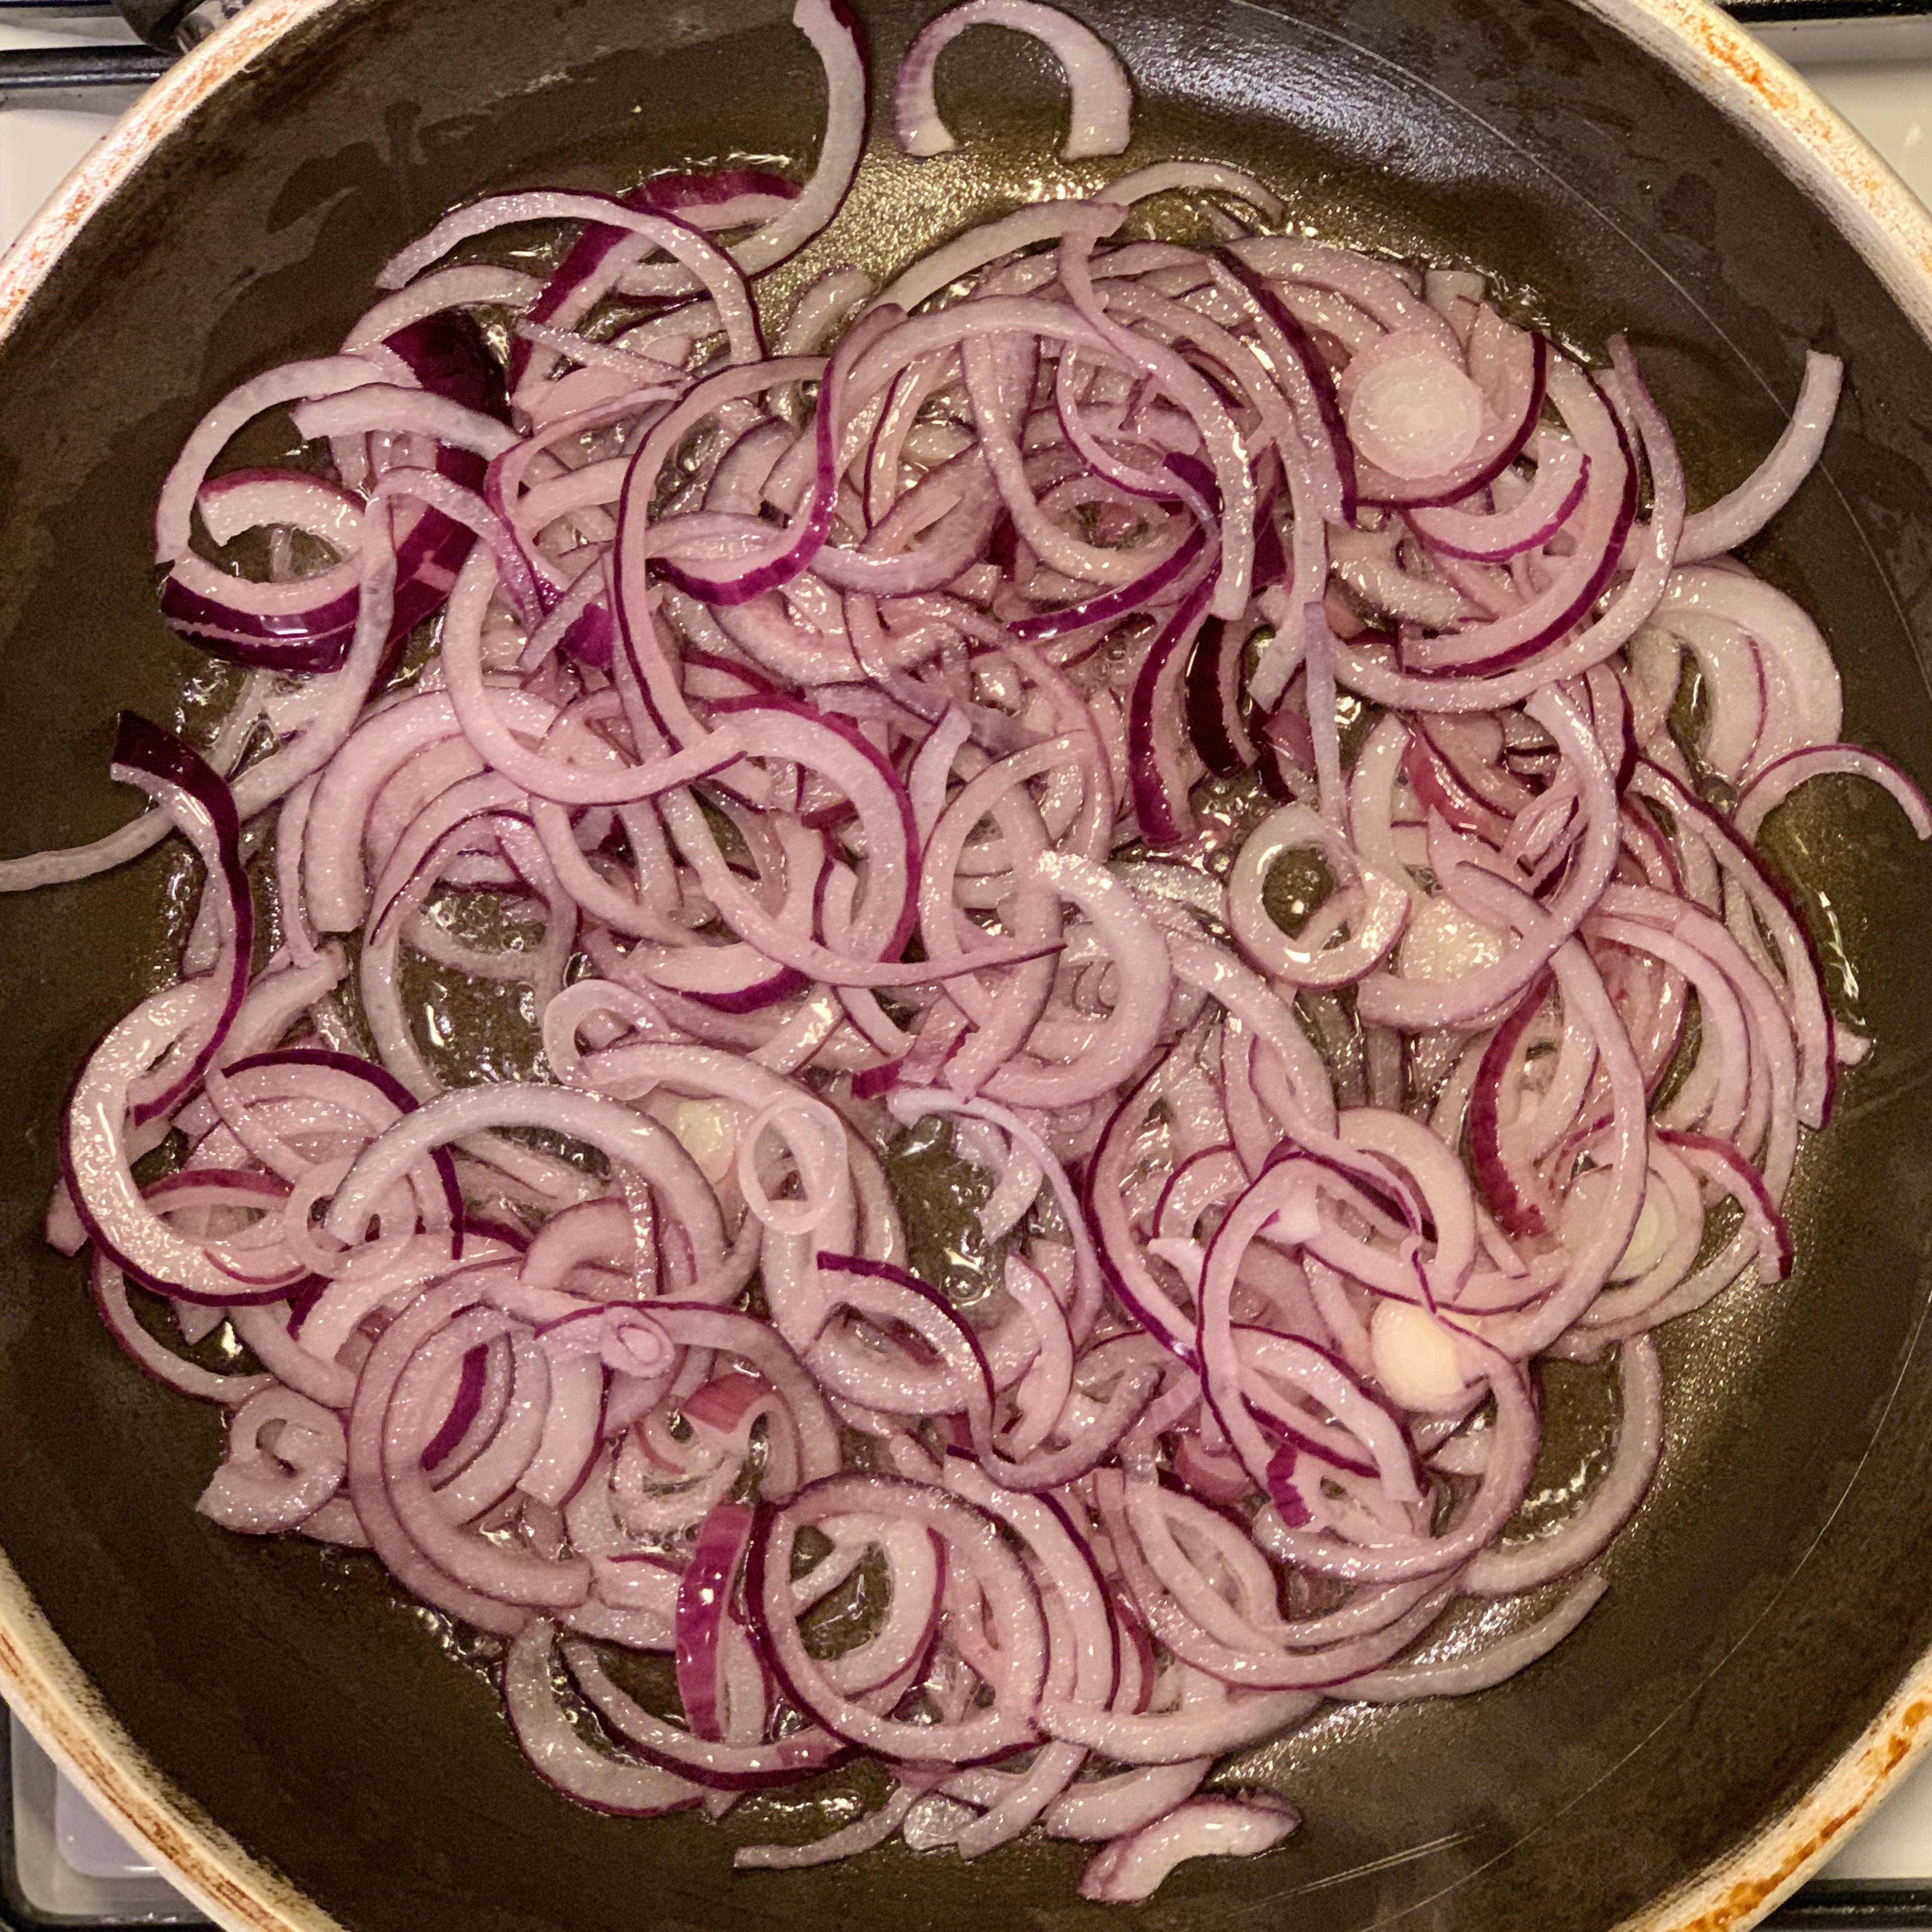 Heat oil in a pan and add the onions. Fry until they turn yellowish.